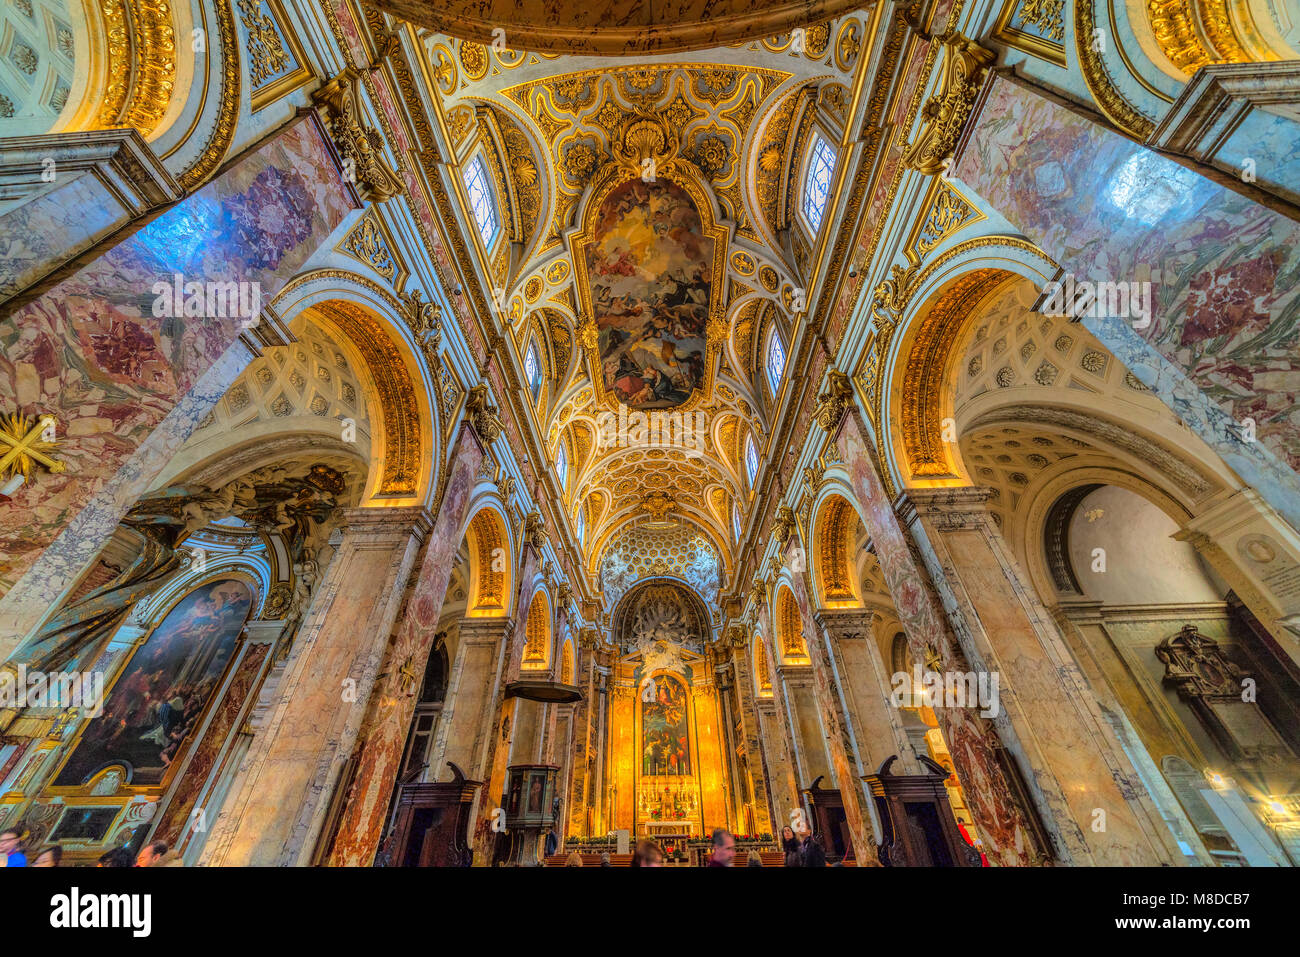 ROME, ITALY - JANUARY 5, 2018: Ceiling view of the Church of San Luigi dei francesi, near Piazza Navona, Rome. tThis church is famous for the Painting Stock Photo